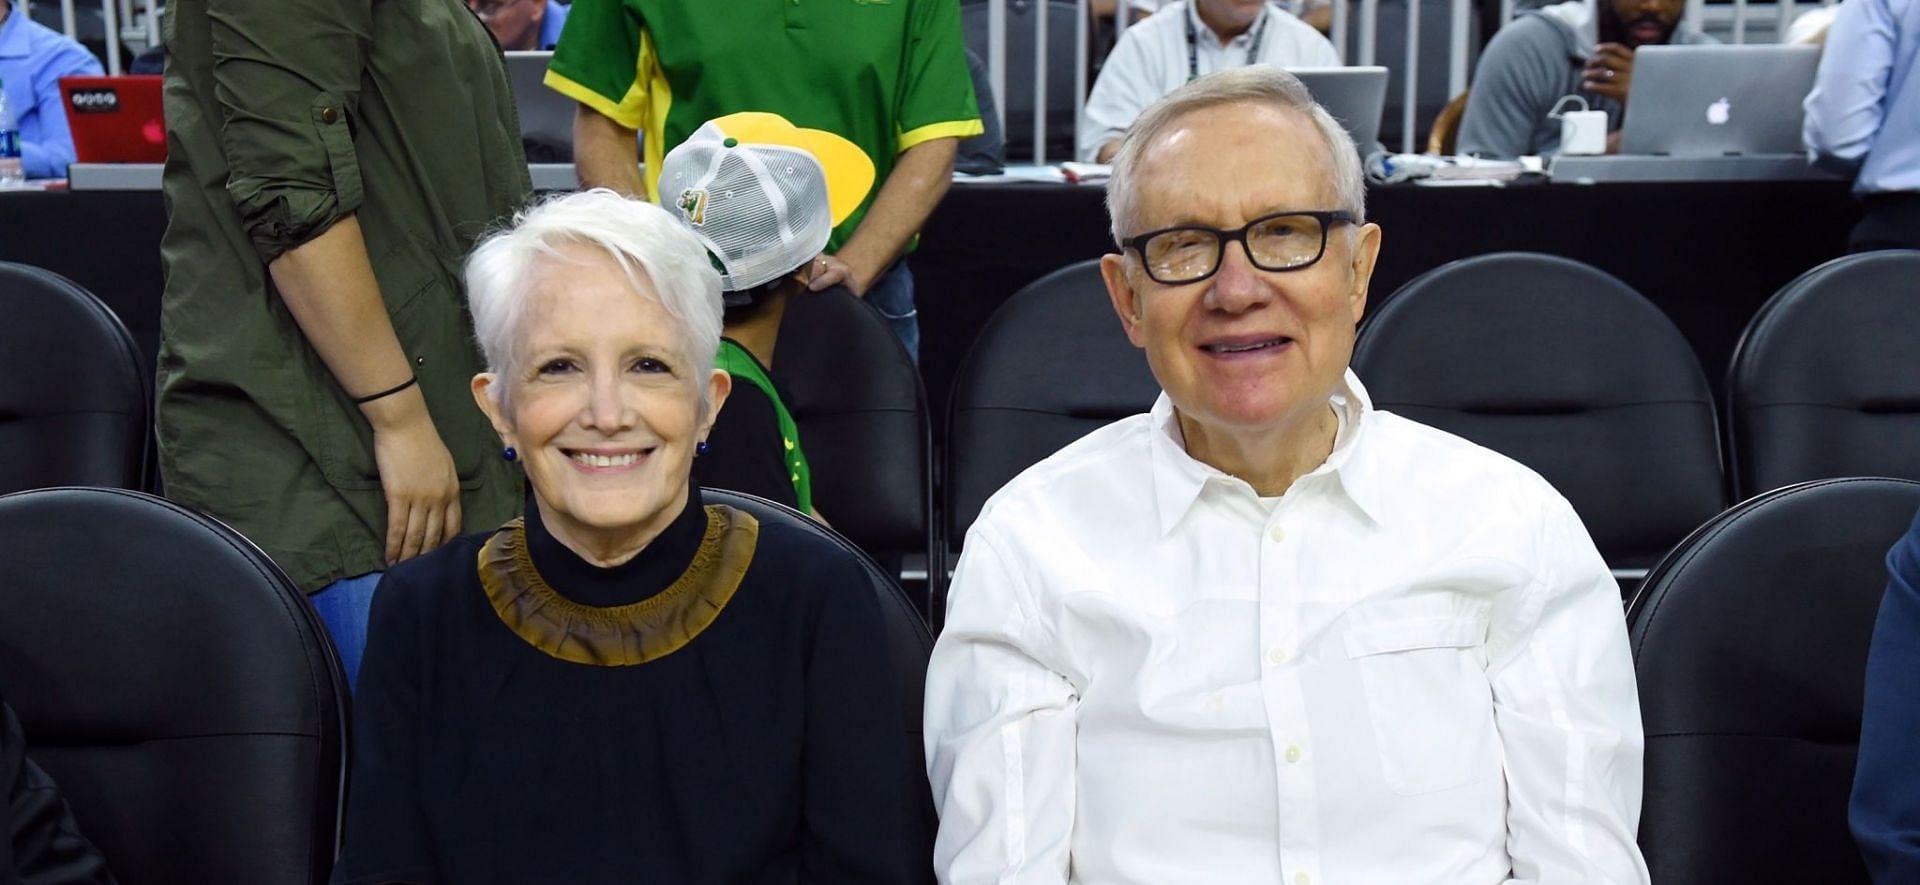 Landra Gould with her husband, Harry Reid (Image via Ethan Miller/Getty Images)